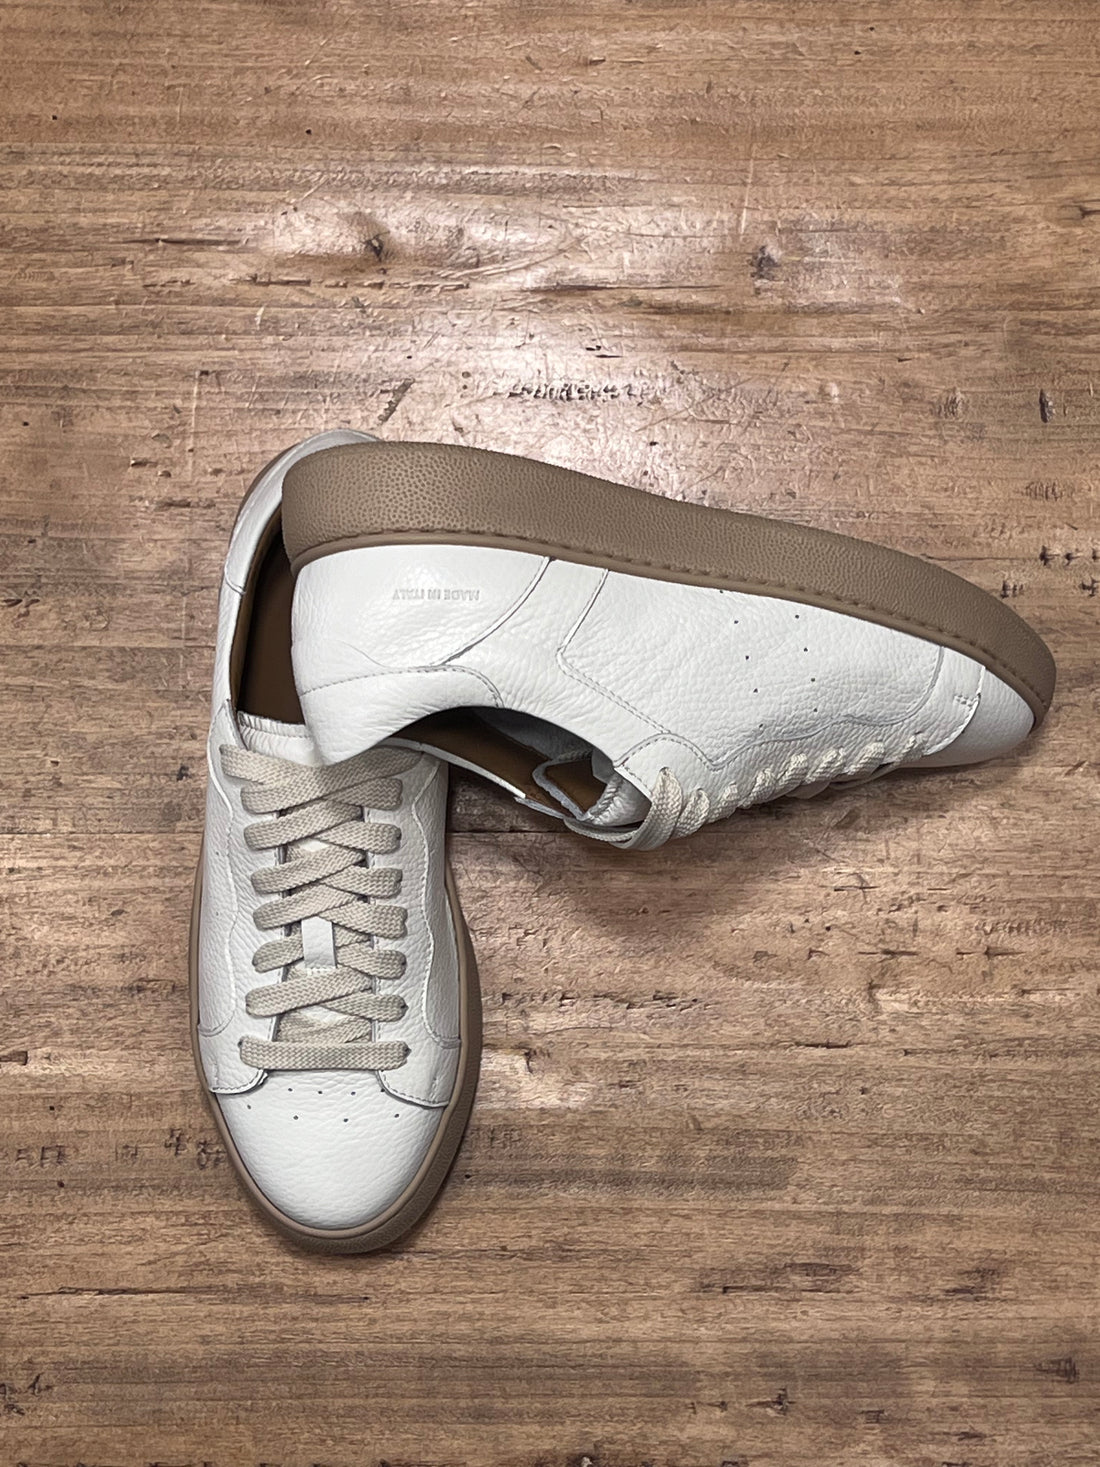 Low sneakers - White grained genuine leather